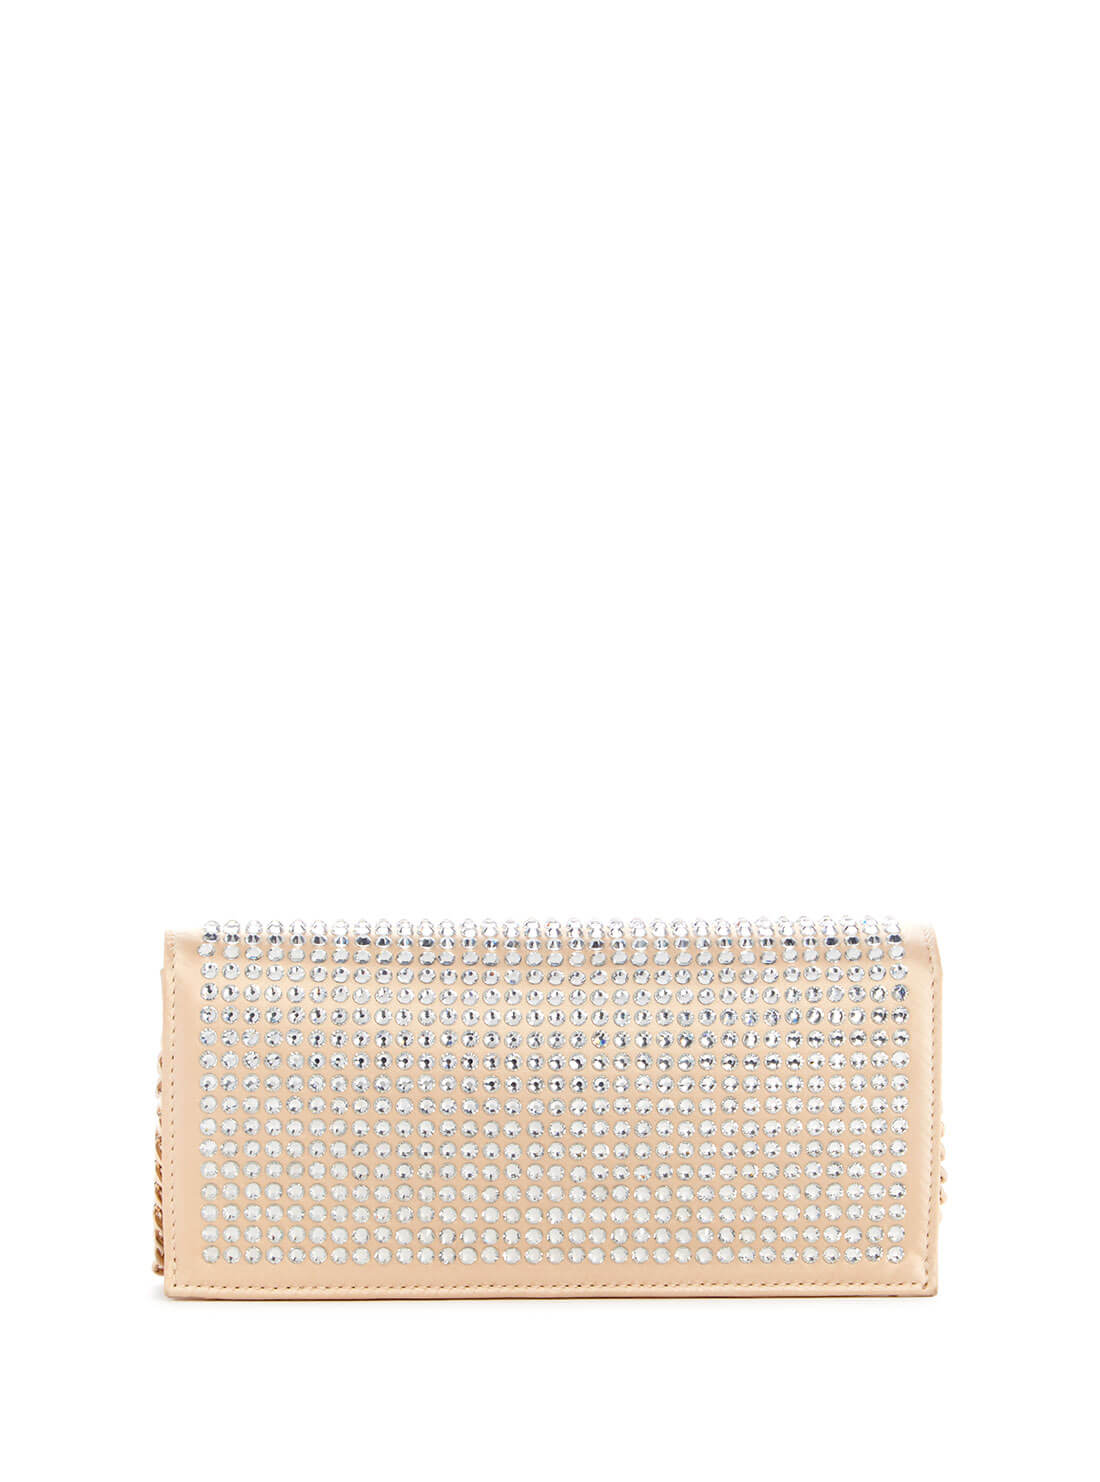 Women's Gold Gilded Glamour Crossbody Clutch back view